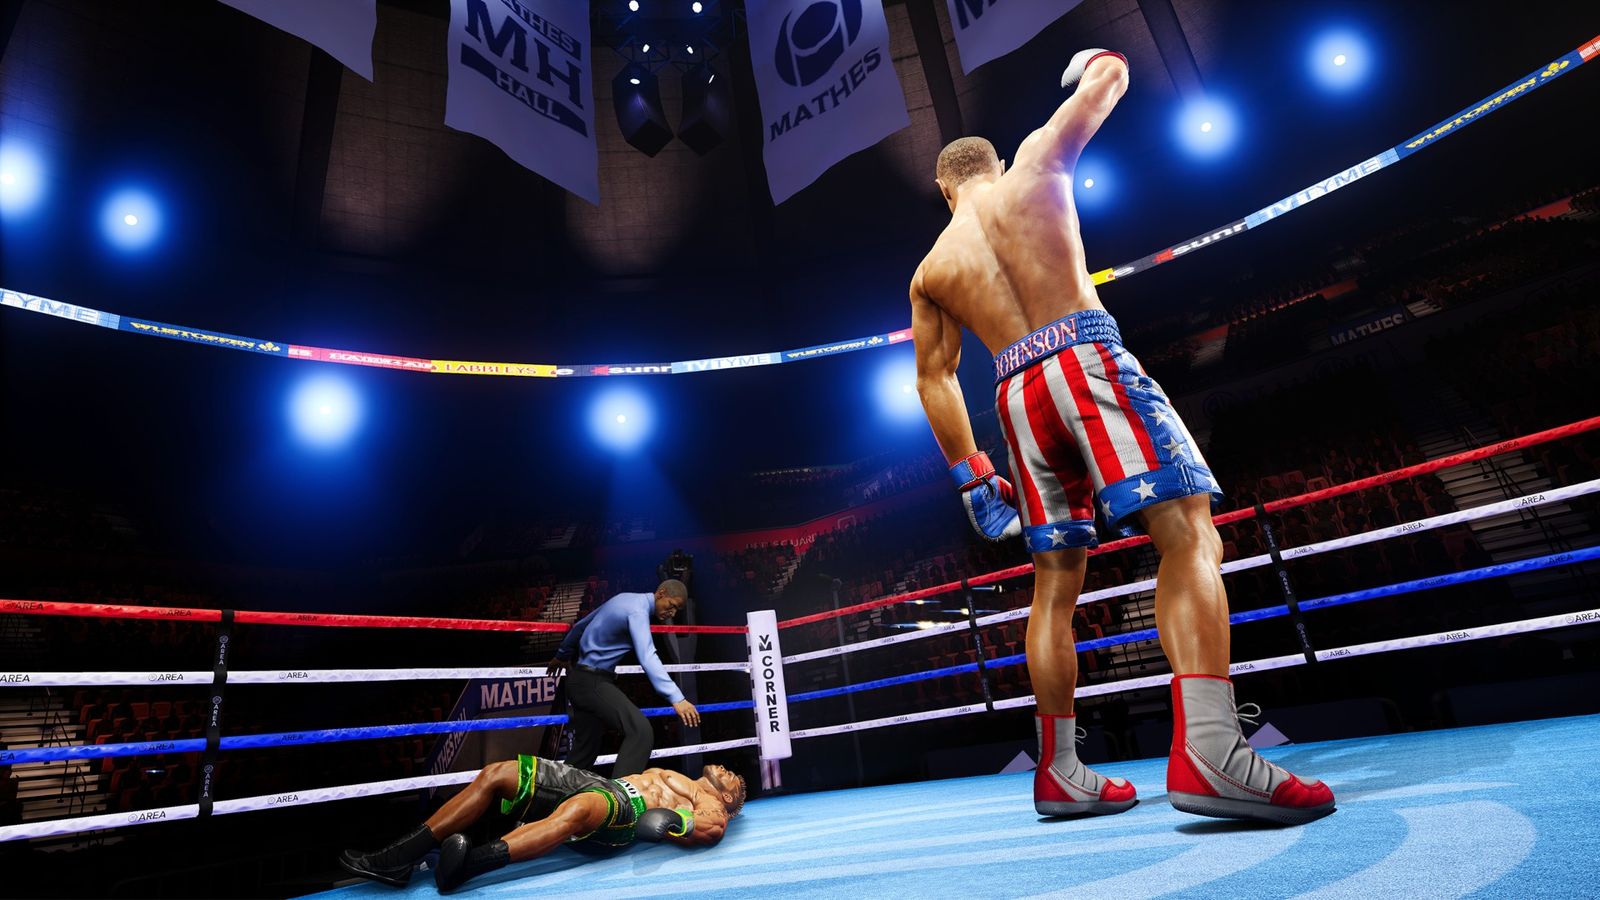 psvr2 30 games coming at launch rocky vr game apollo creed knockout